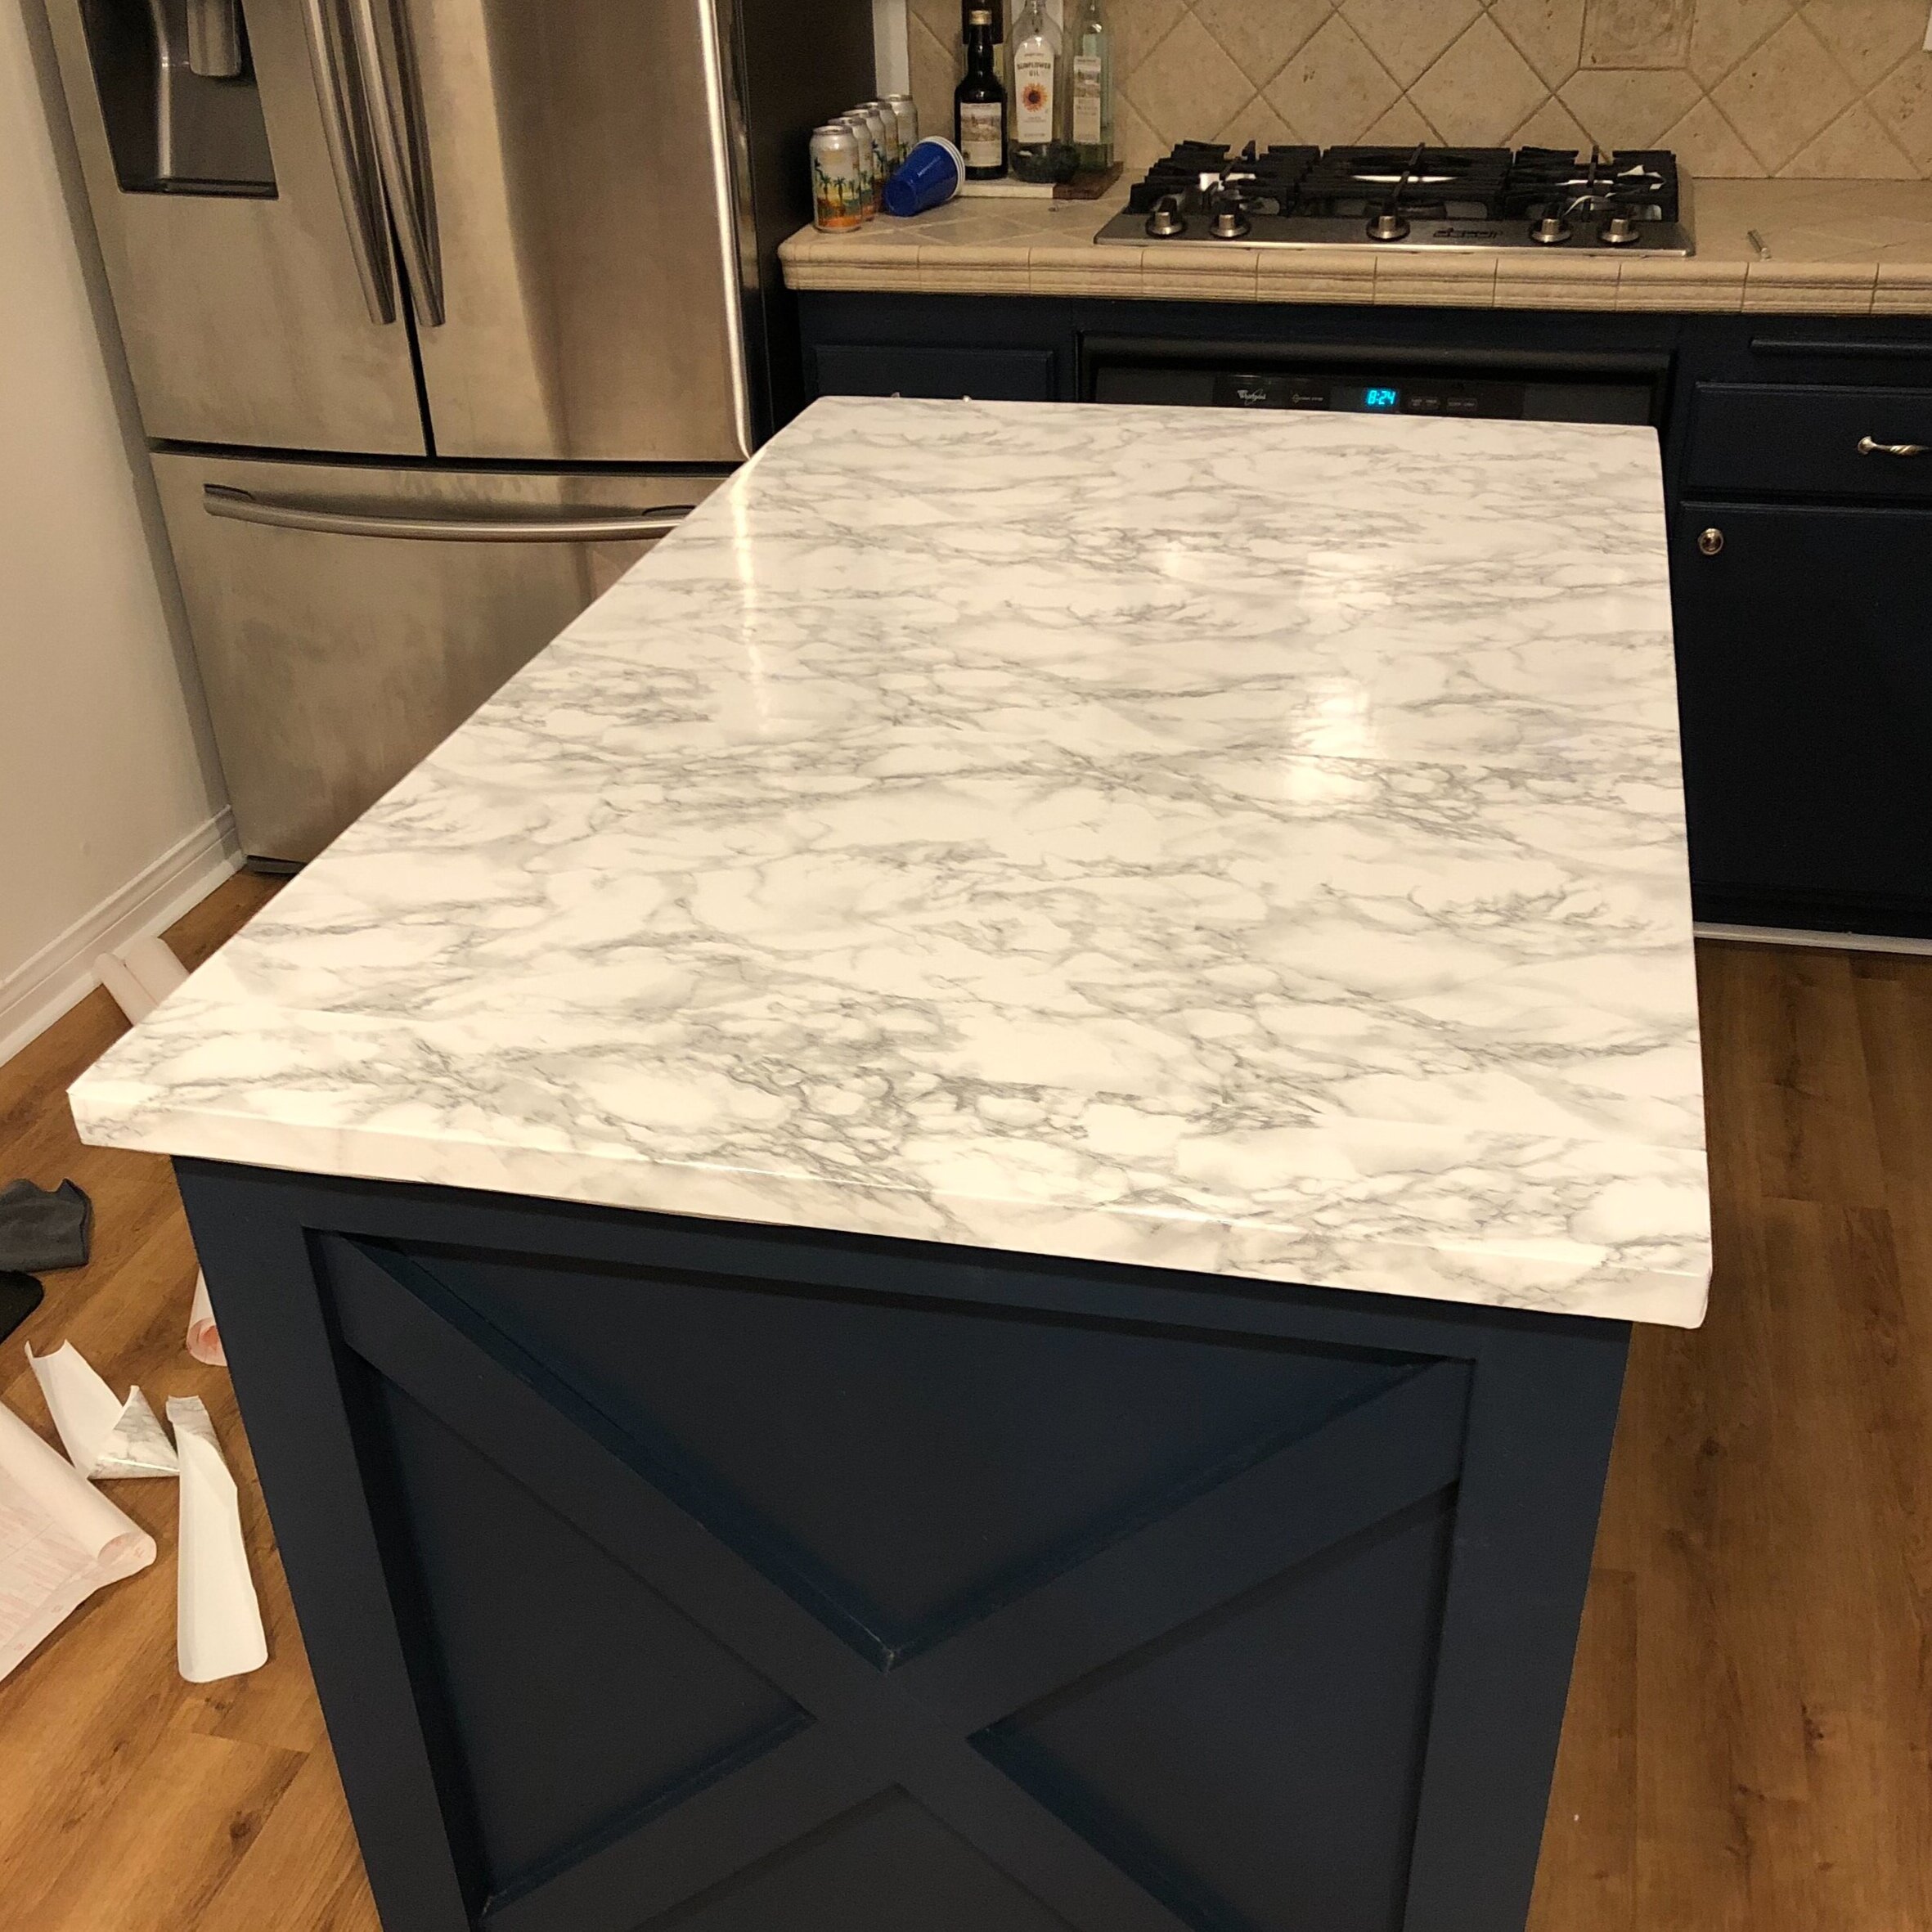 House Update: Bathroom Vanity with Marble Contact Paper — THE